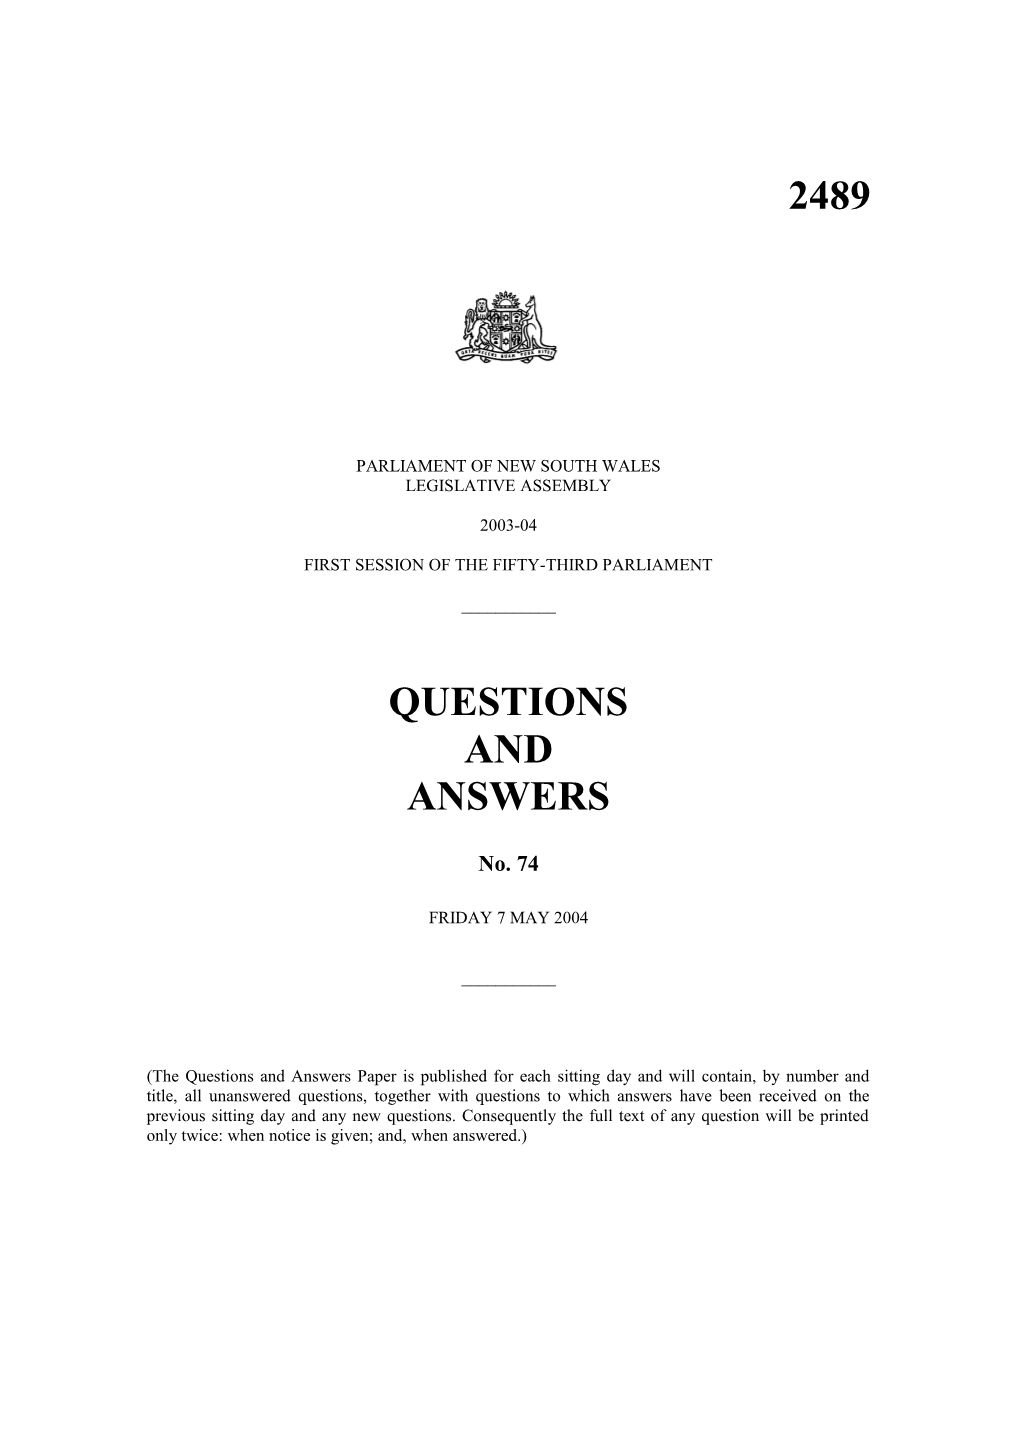 Legislative Assembly Questions and Answers